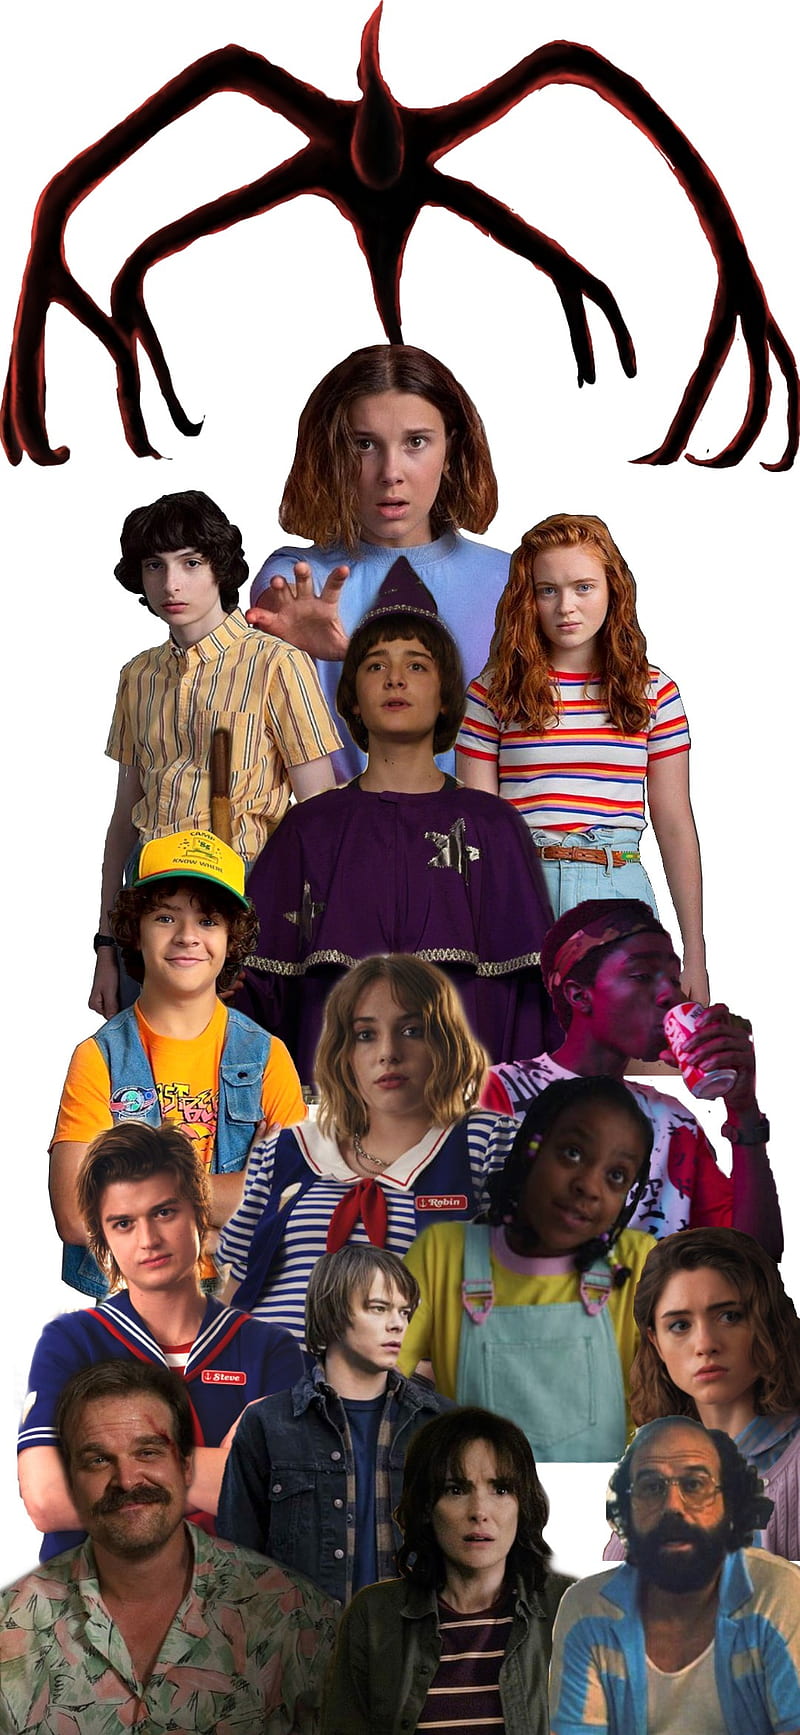 Aggregate more than 71 stranger things wallpaper max - in.cdgdbentre